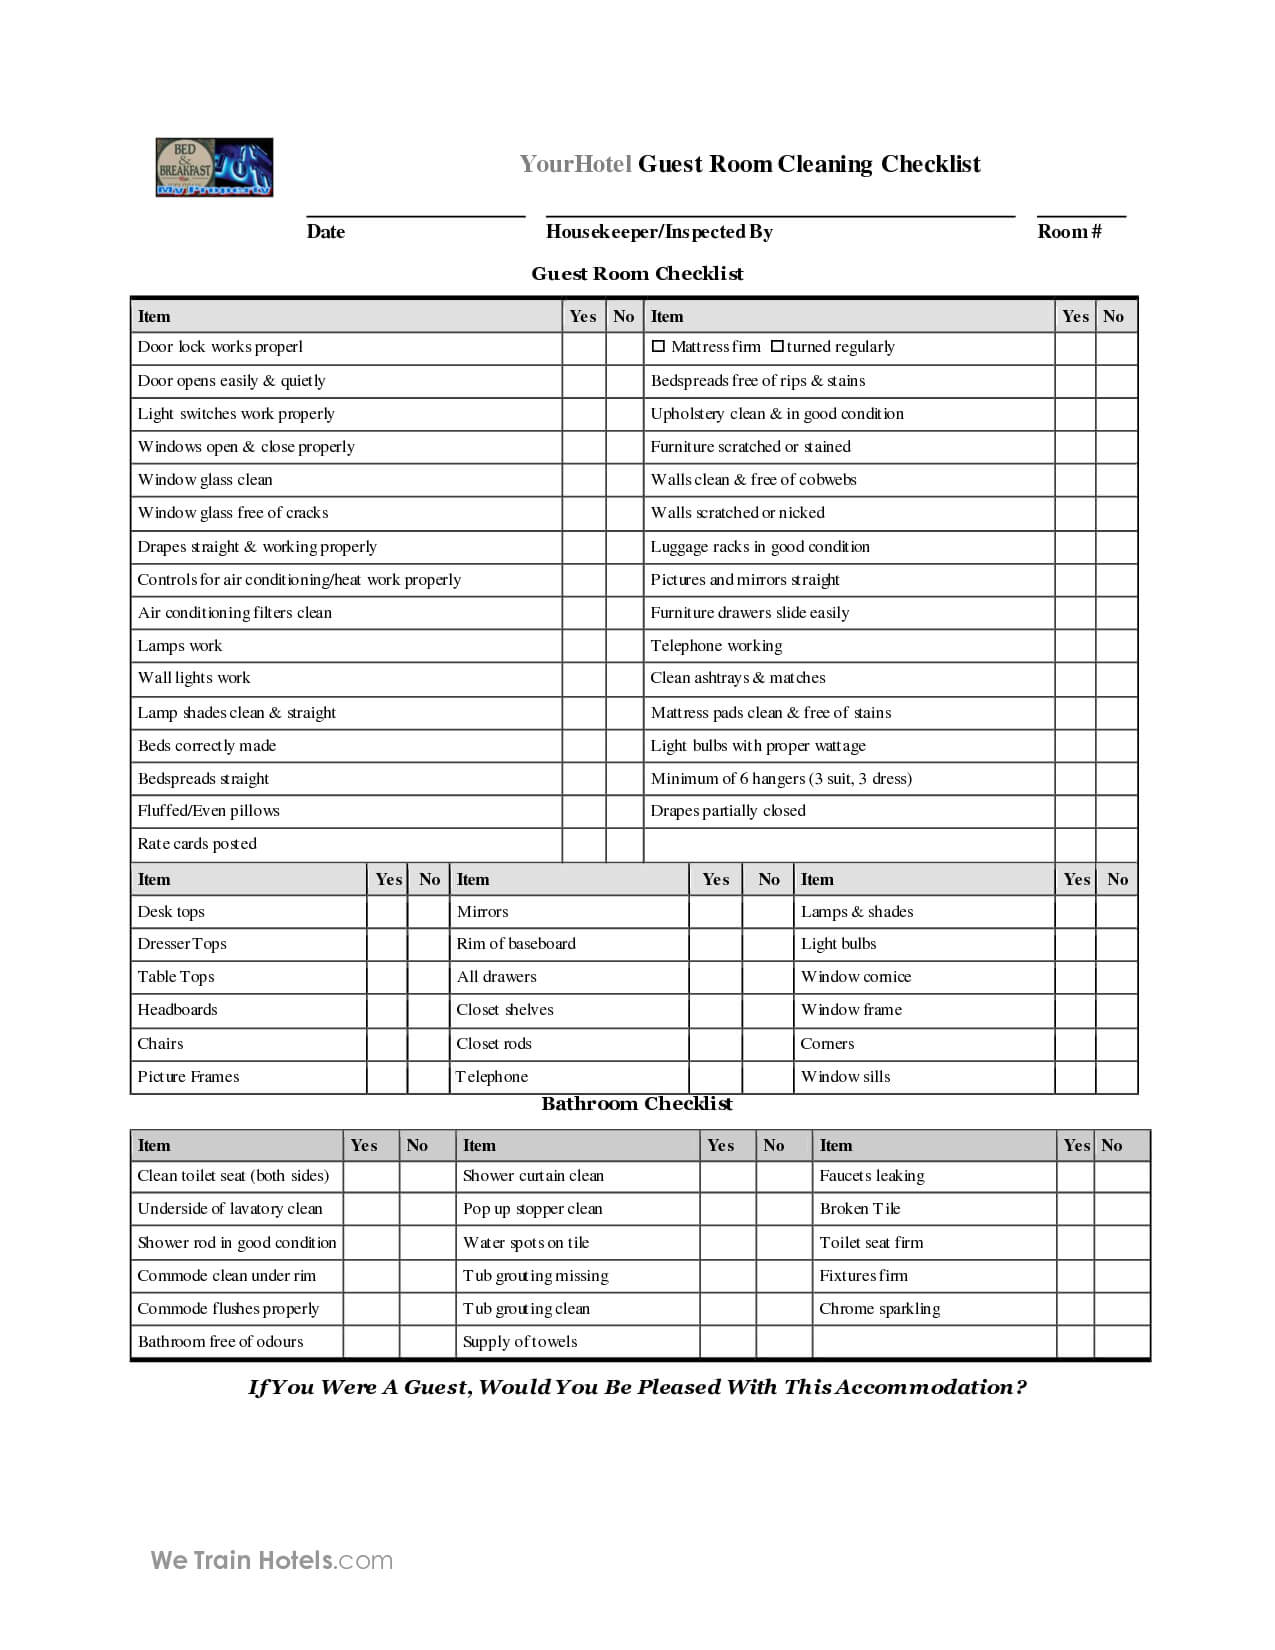 Blank+Cleaning+Checklist+Template | Cleaning Checklist Regarding Blank Cleaning Schedule Template